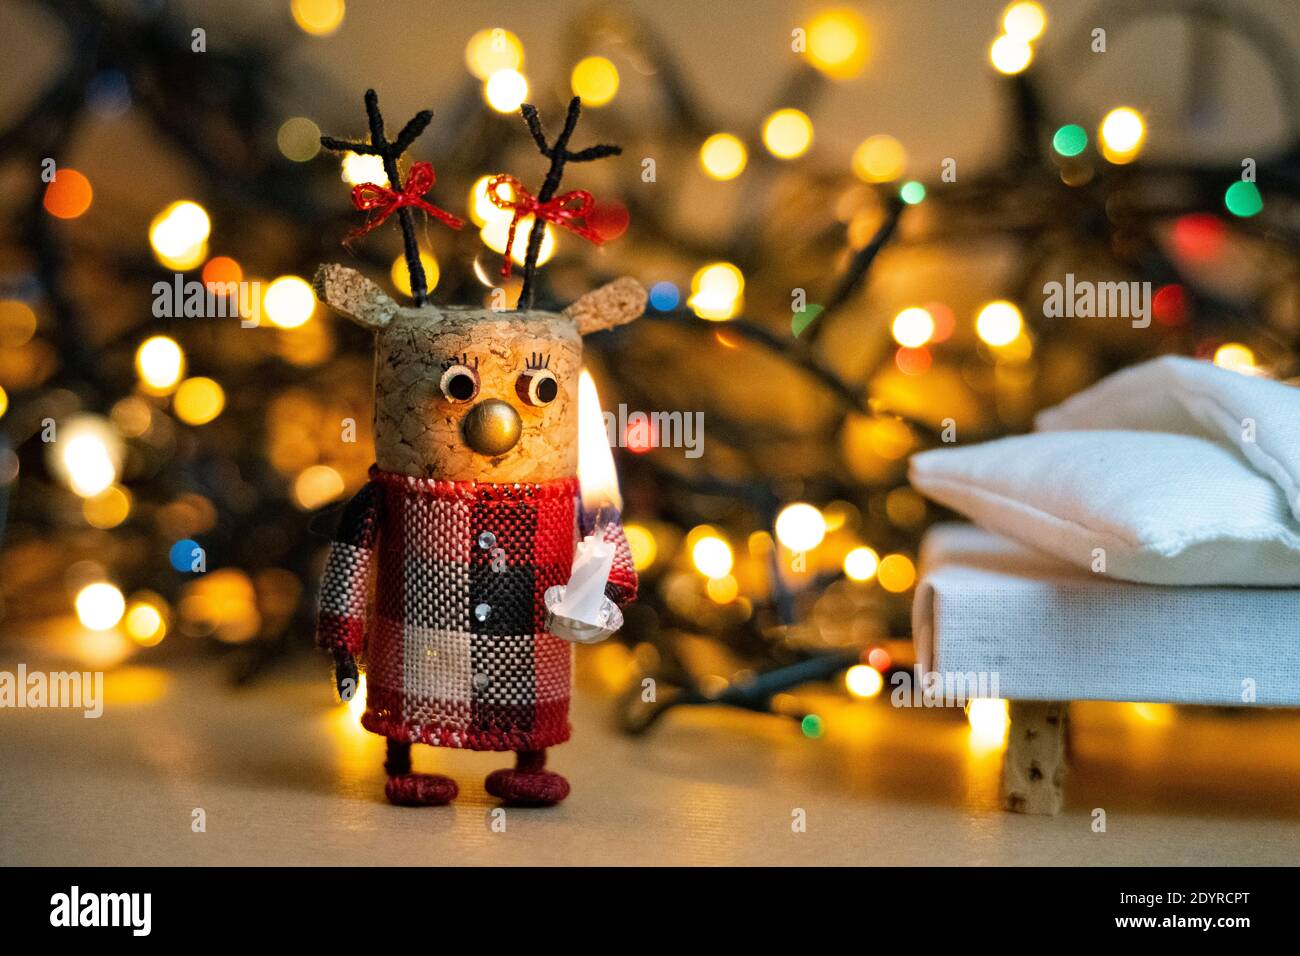 Christmas lights bokeh with a handmade deer decoration made of champagne cork holding a candle having a curious and surprised Stock Photo